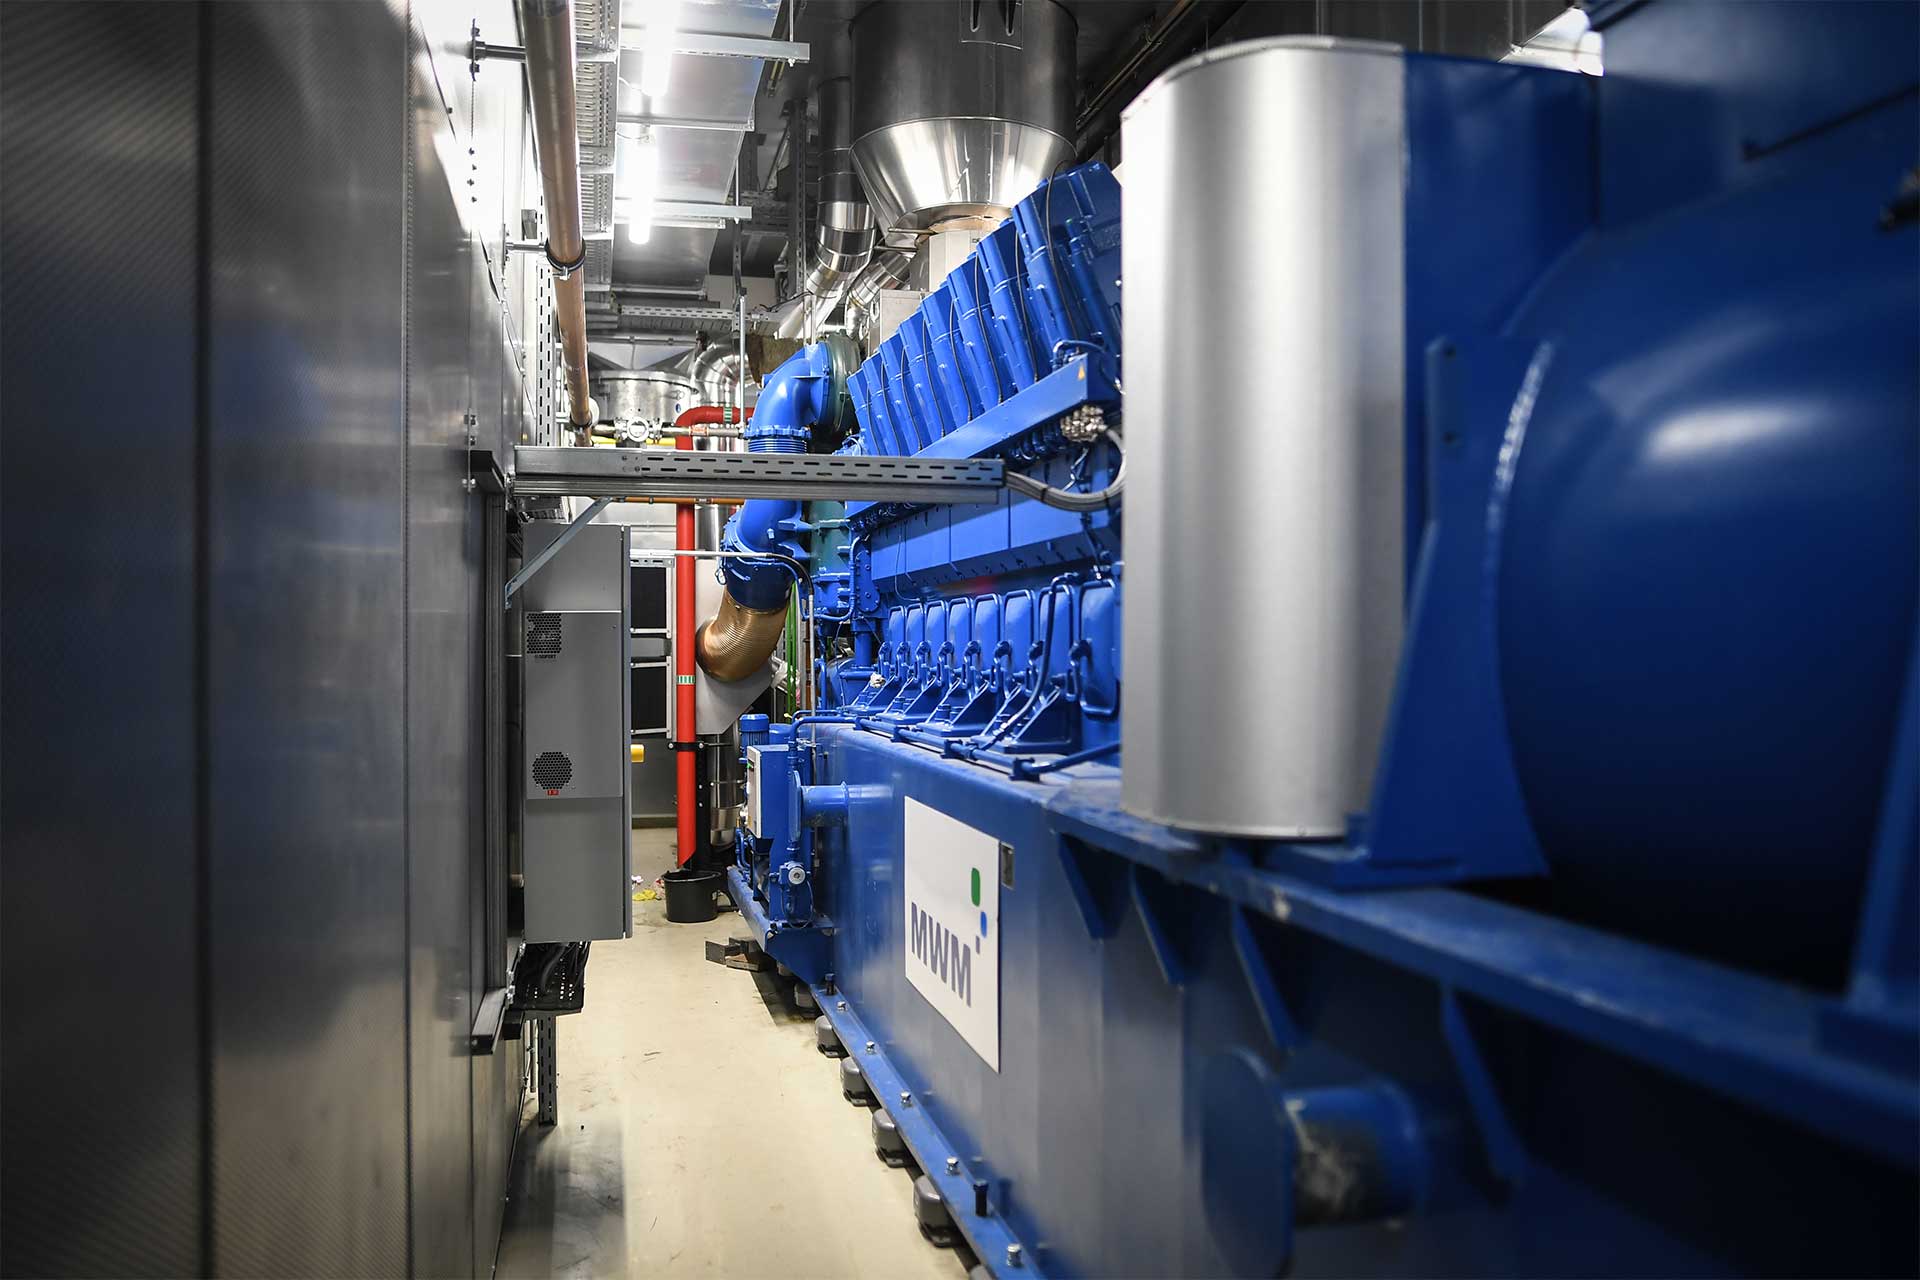 The flexible power plant of Stadtwerke Duisburg AG uses seven MWM TCG 2032B V16 gas engines to produce heat and power for the city's energy and district heating supply. (© Daniel Tomczak / DVV)